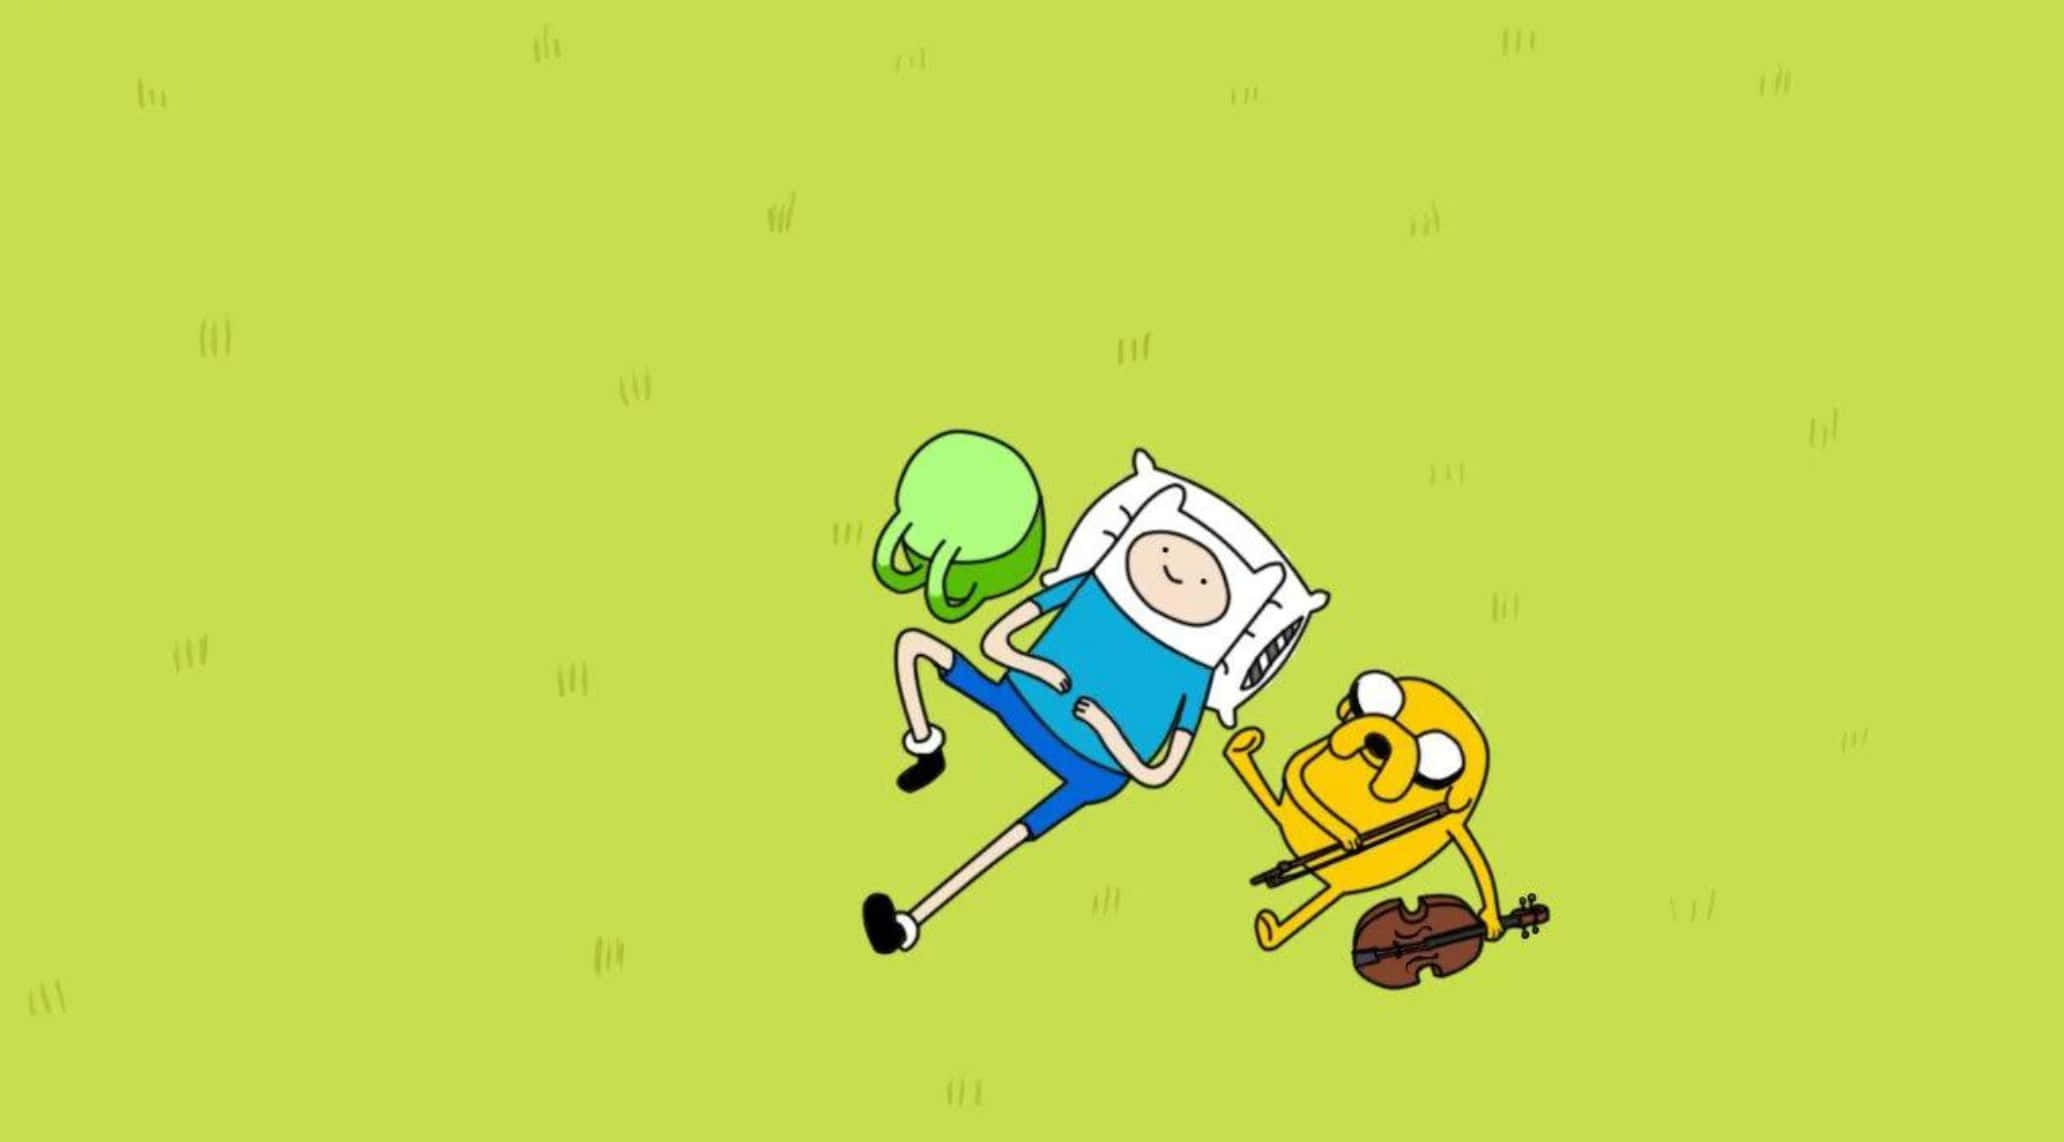 "Adventure Time: Join Finn and Jake on an epic quest filled with adventure!"